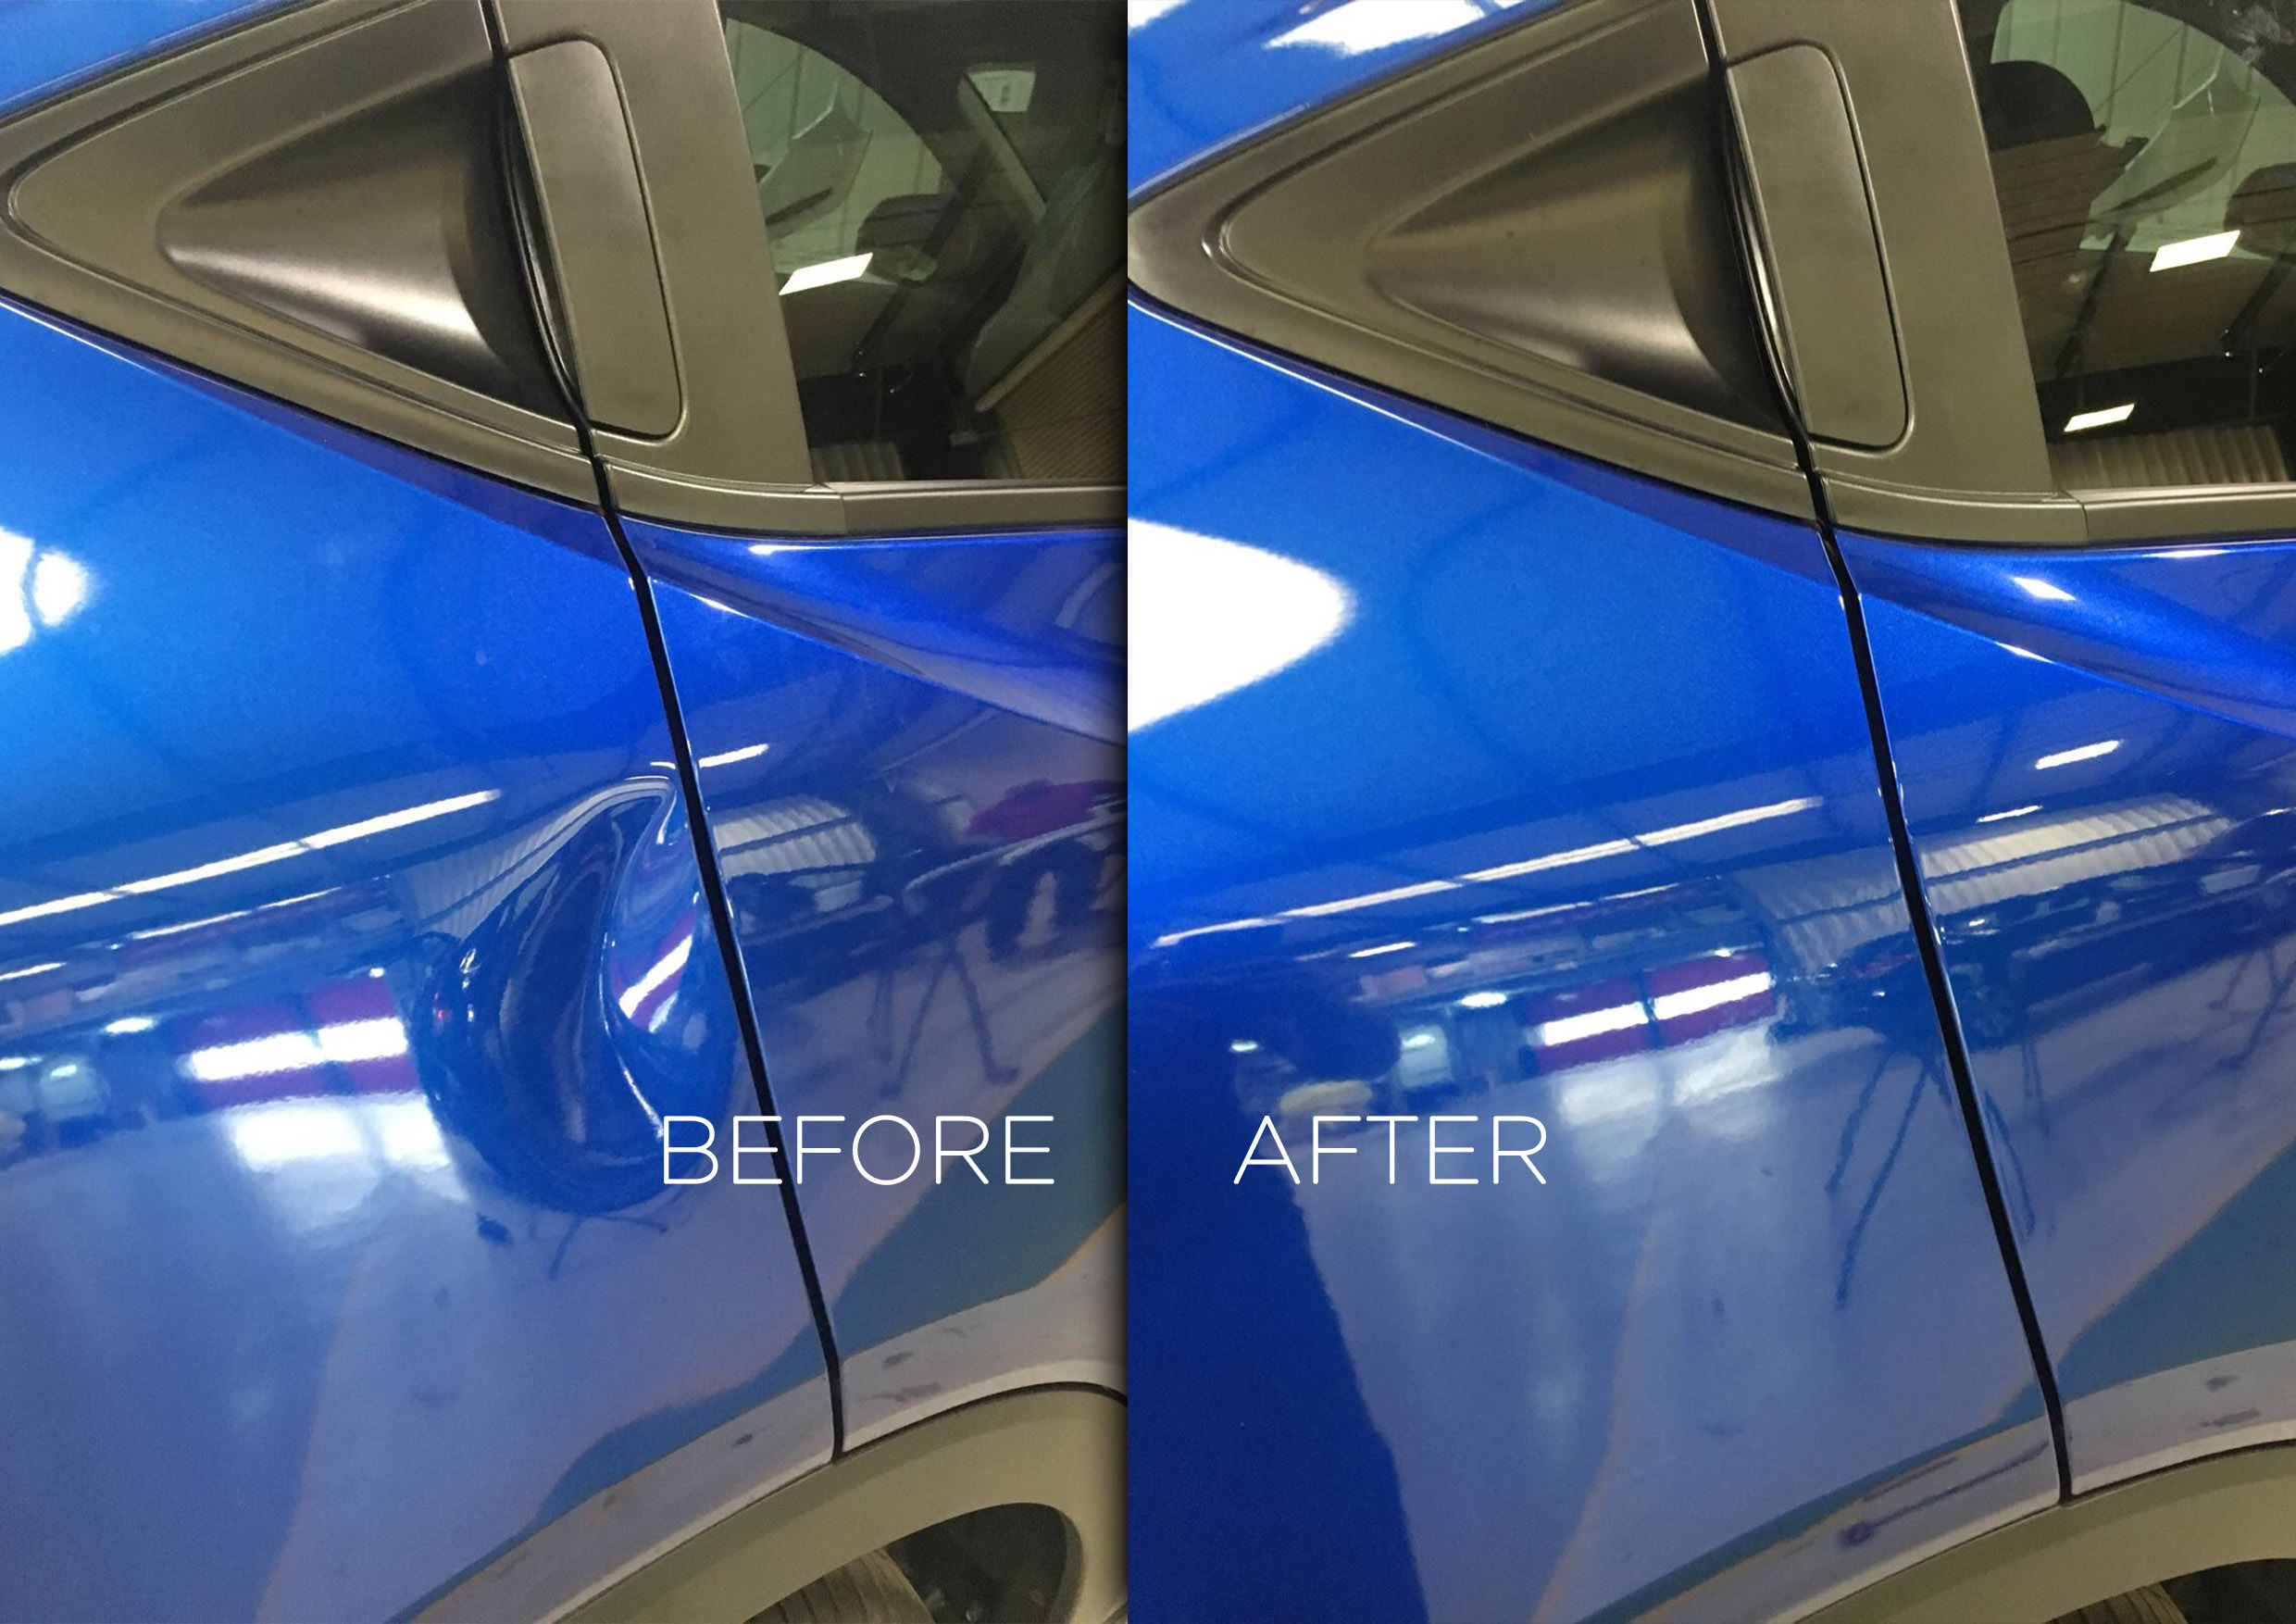 Dingmasters Latest repairs | See our latest before and after pictures